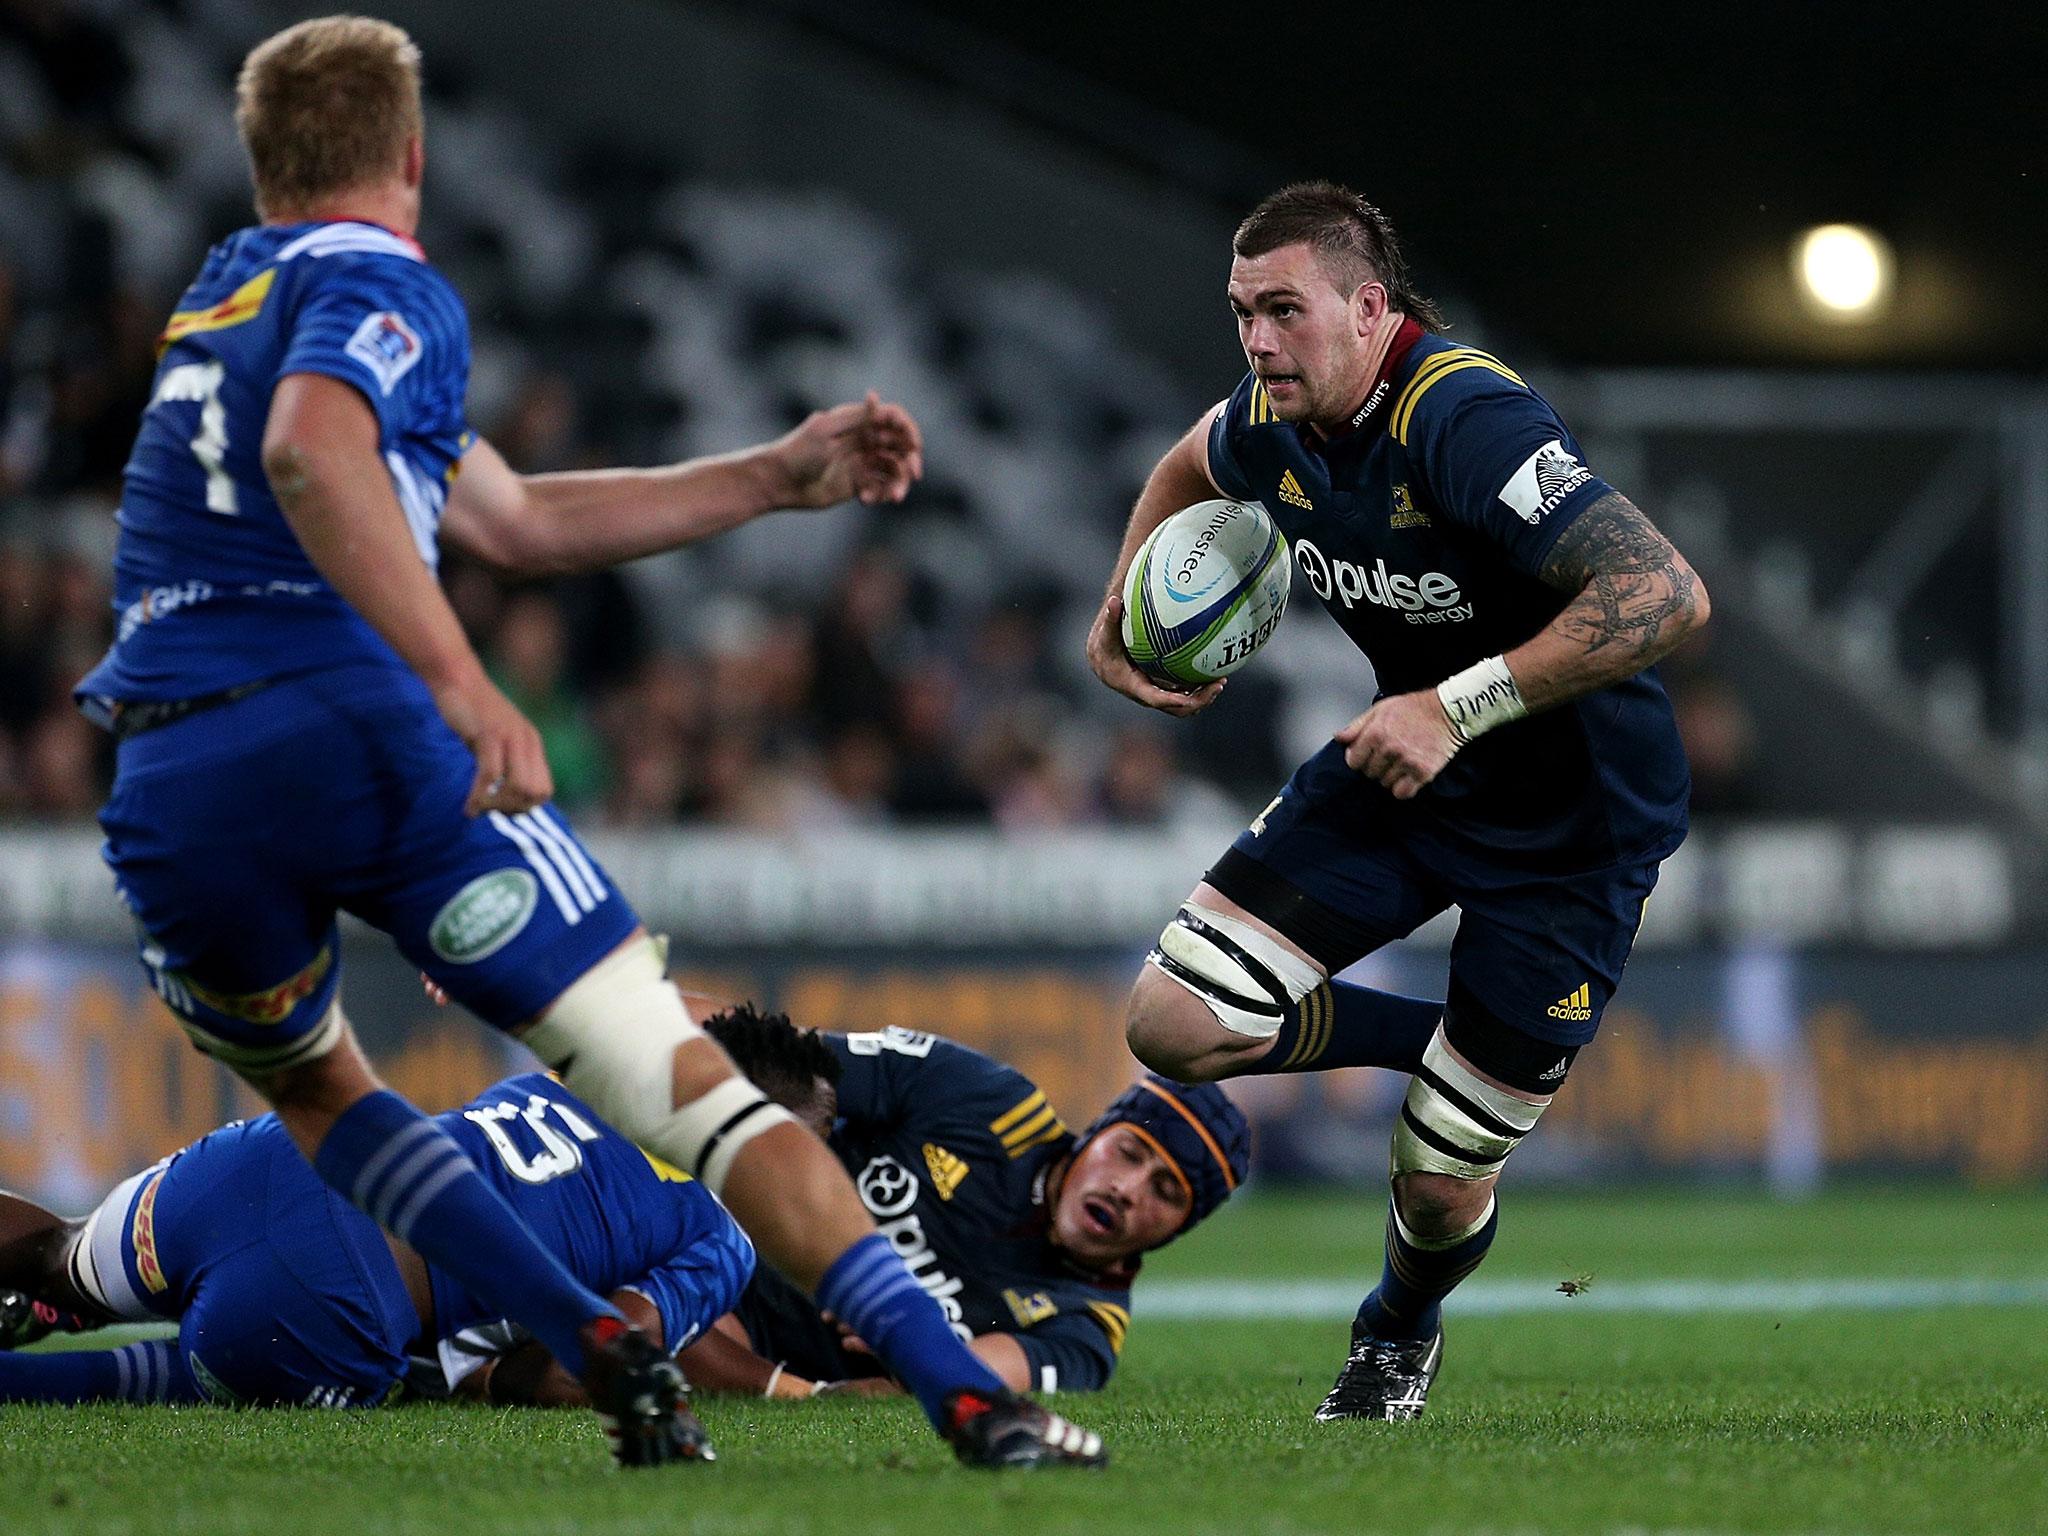 Liam Squire suffered a broken thumb in the Otago Highlanders' 45-41 victory over the Cheetahs